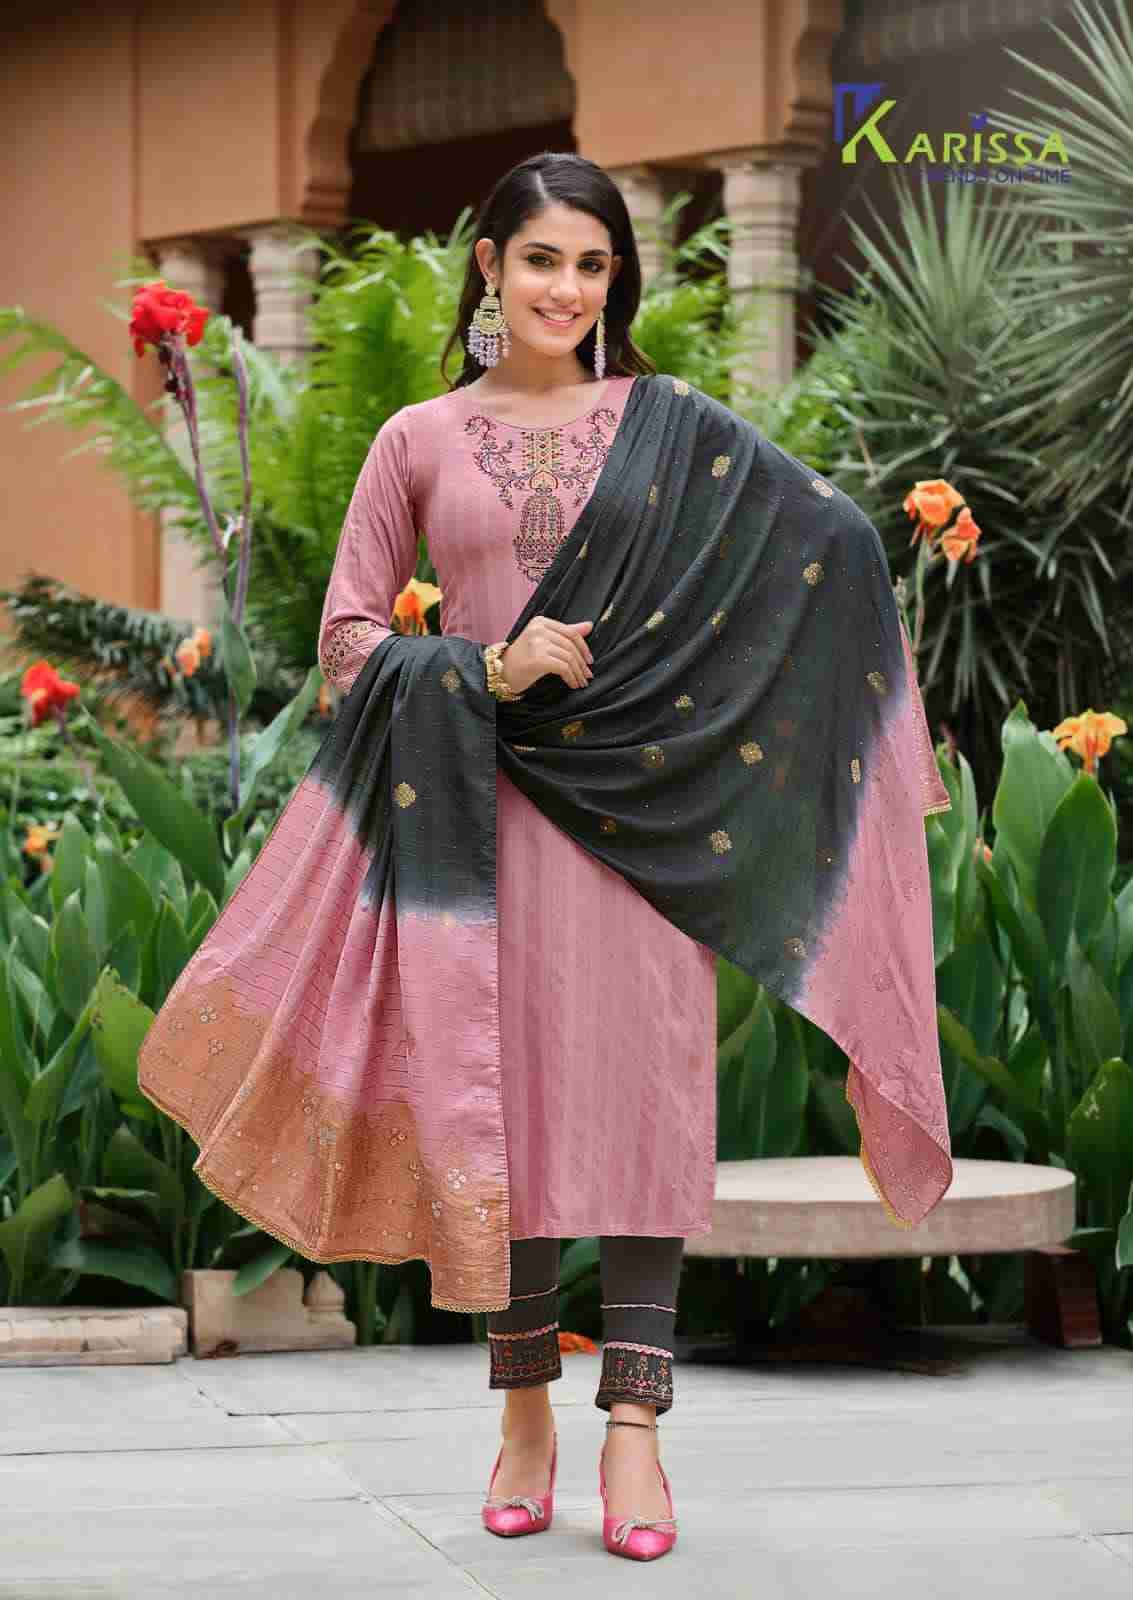 Anushka By Karissa 1001 To 1006 Series Beautiful Stylish Festive Suits Fancy Colorful Casual Wear & Ethnic Wear & Ready To Wear Viscose Rayon Dresses At Wholesale Price